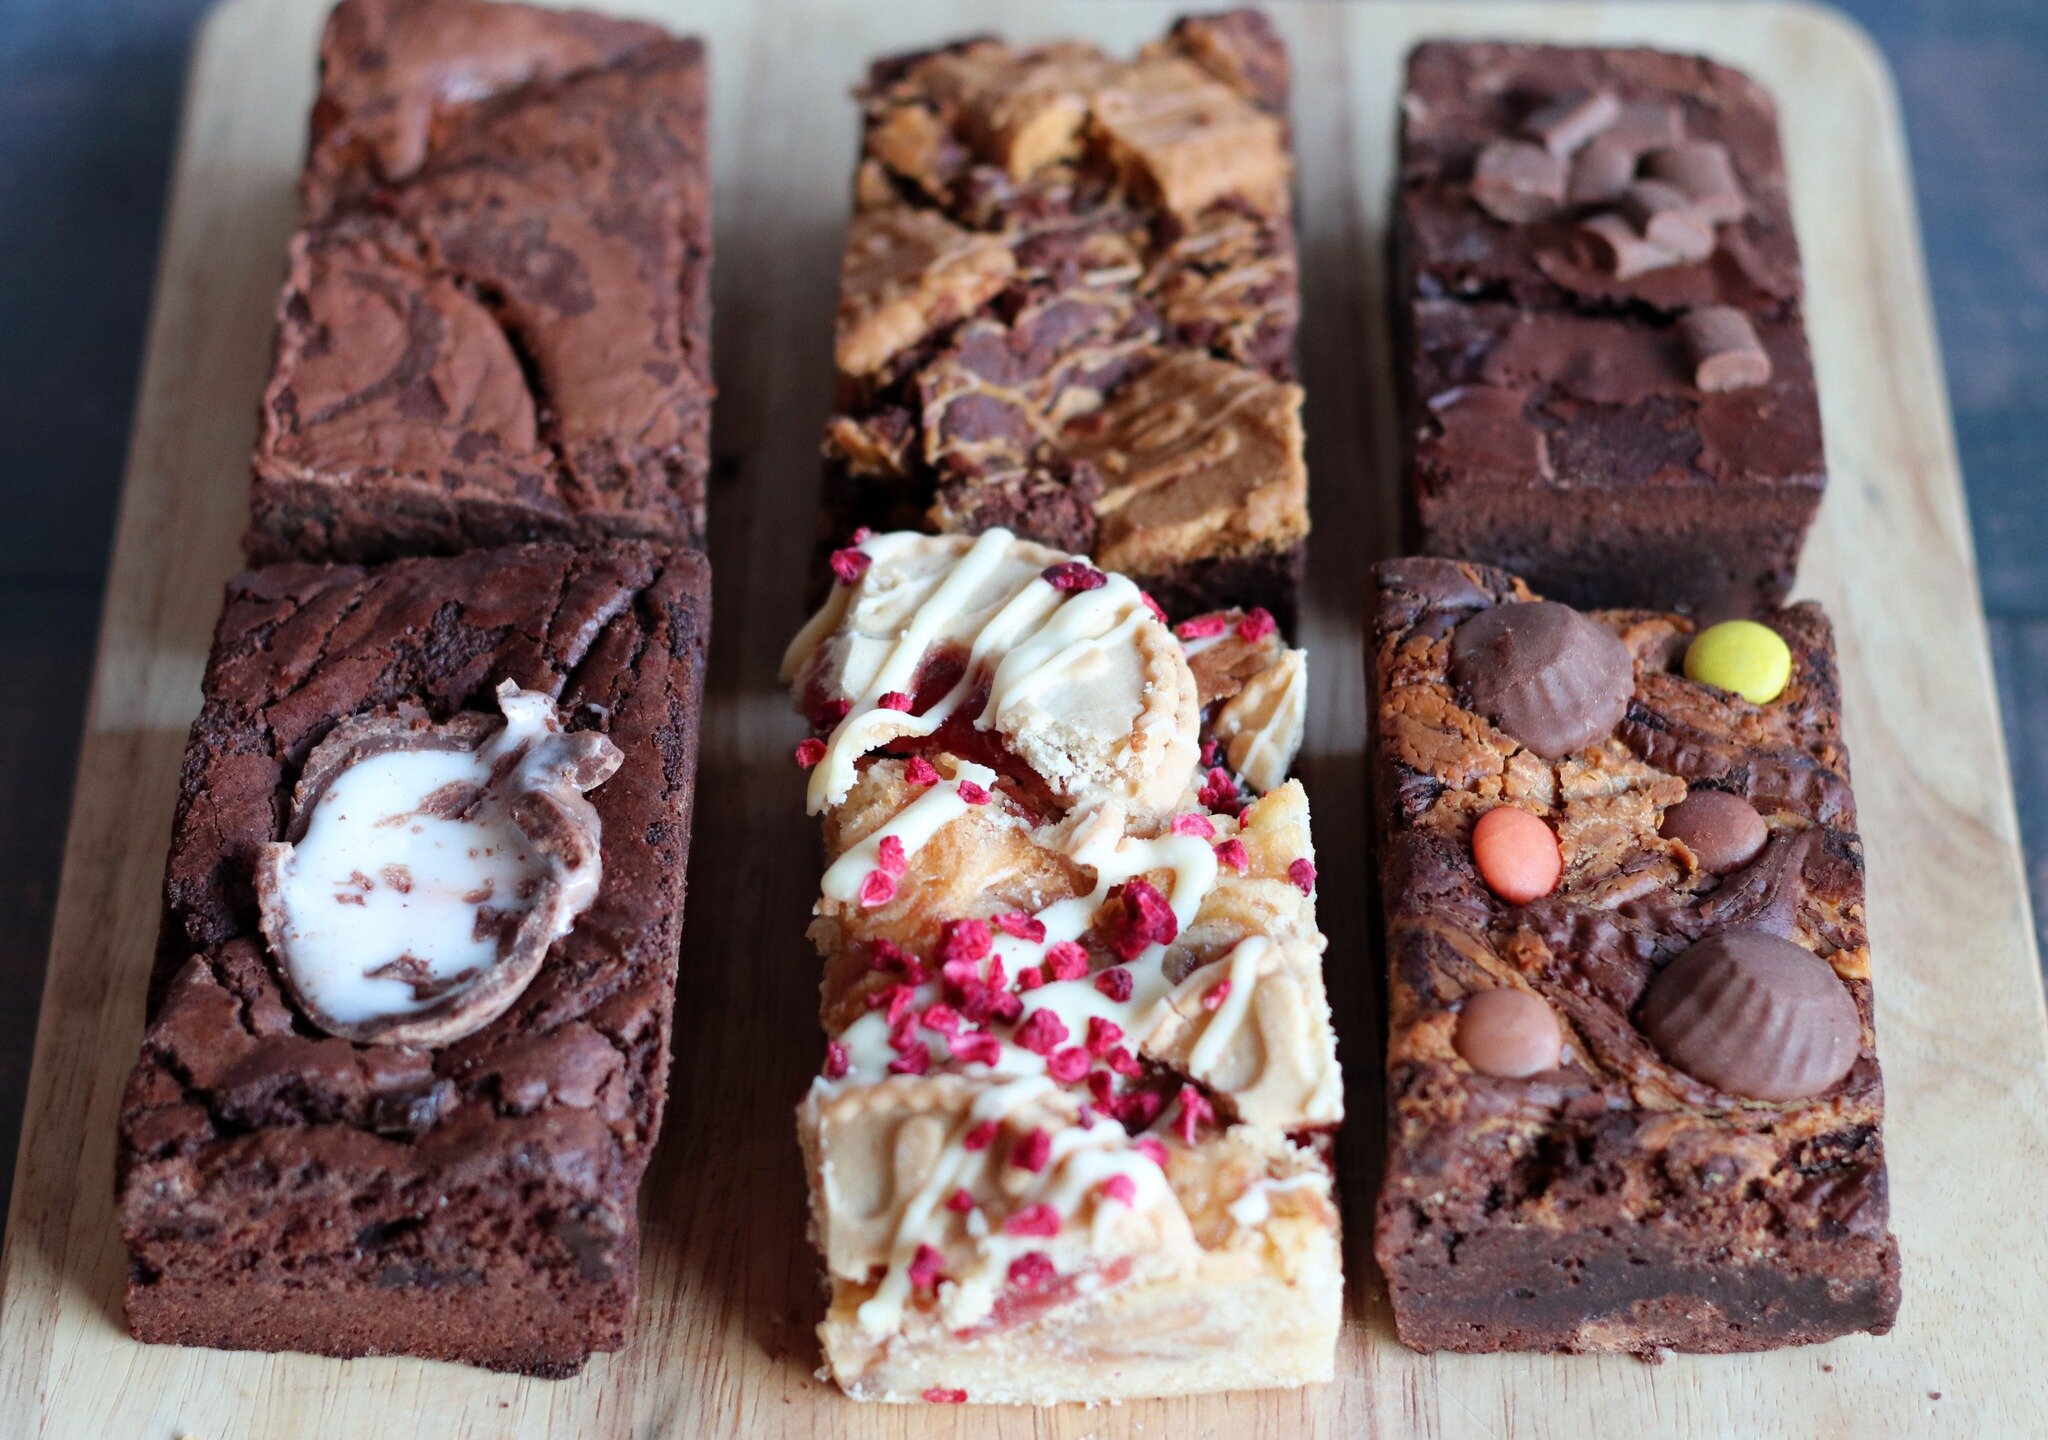 🍭Embrace the beauty of imperfection! Our wonky boxes are packed with charmingly misshapen, delightfully imperfect creations. 

🌰We don't like to waste anything here at All Things Sweet so our wonky brownies and blondies are available for collection